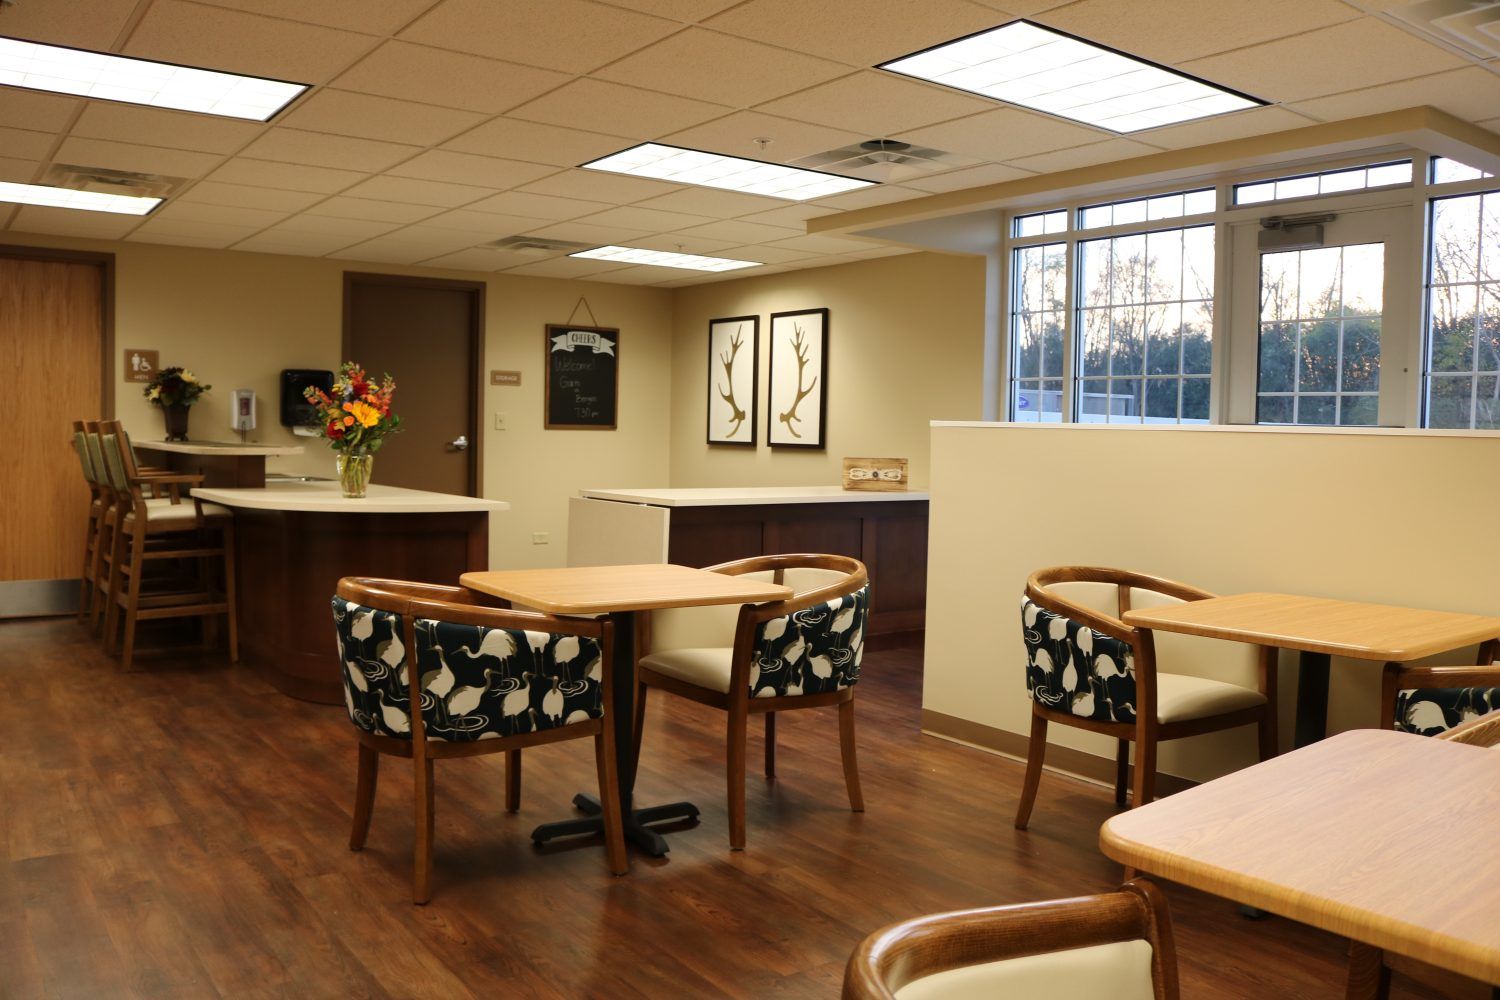 Interior view of Lacey Creek Supportive Living's dining area with wooden furniture and art decor.